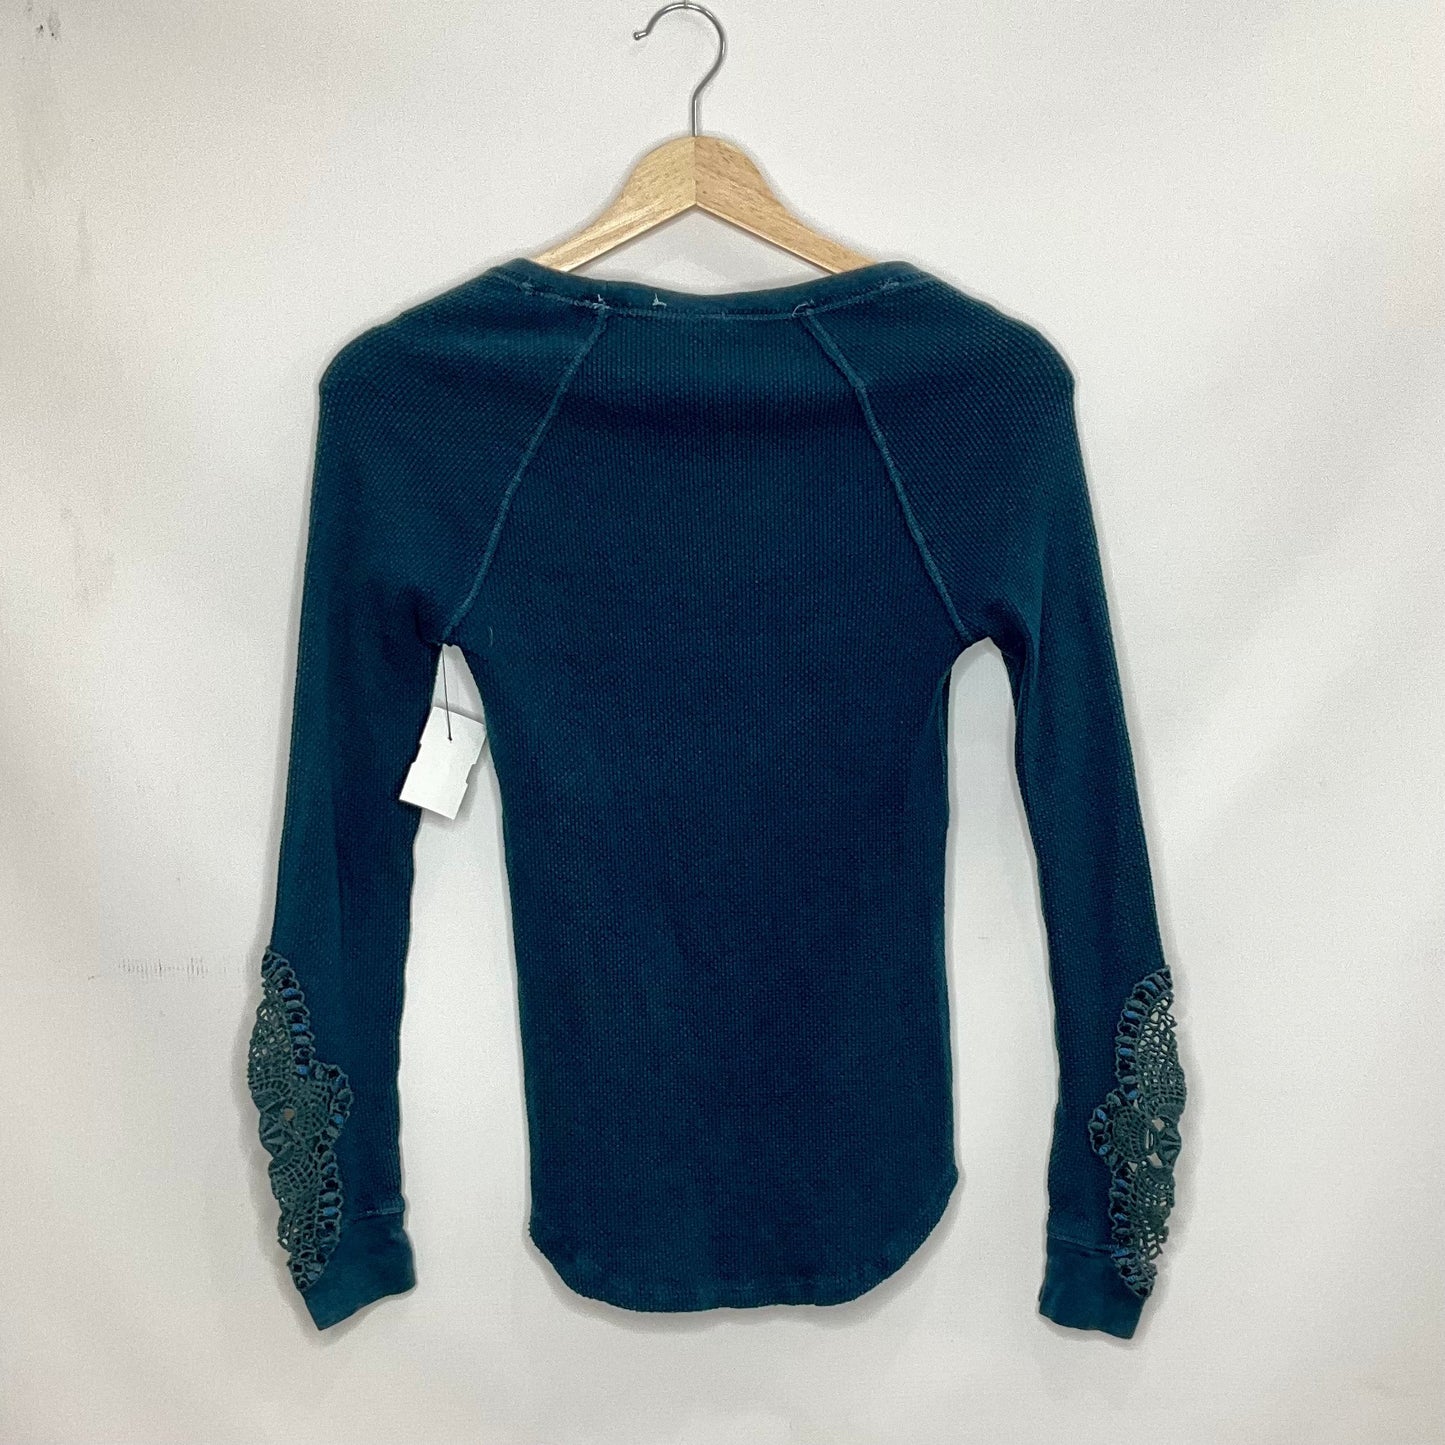 Blue Top Long Sleeve We The Free, Size M